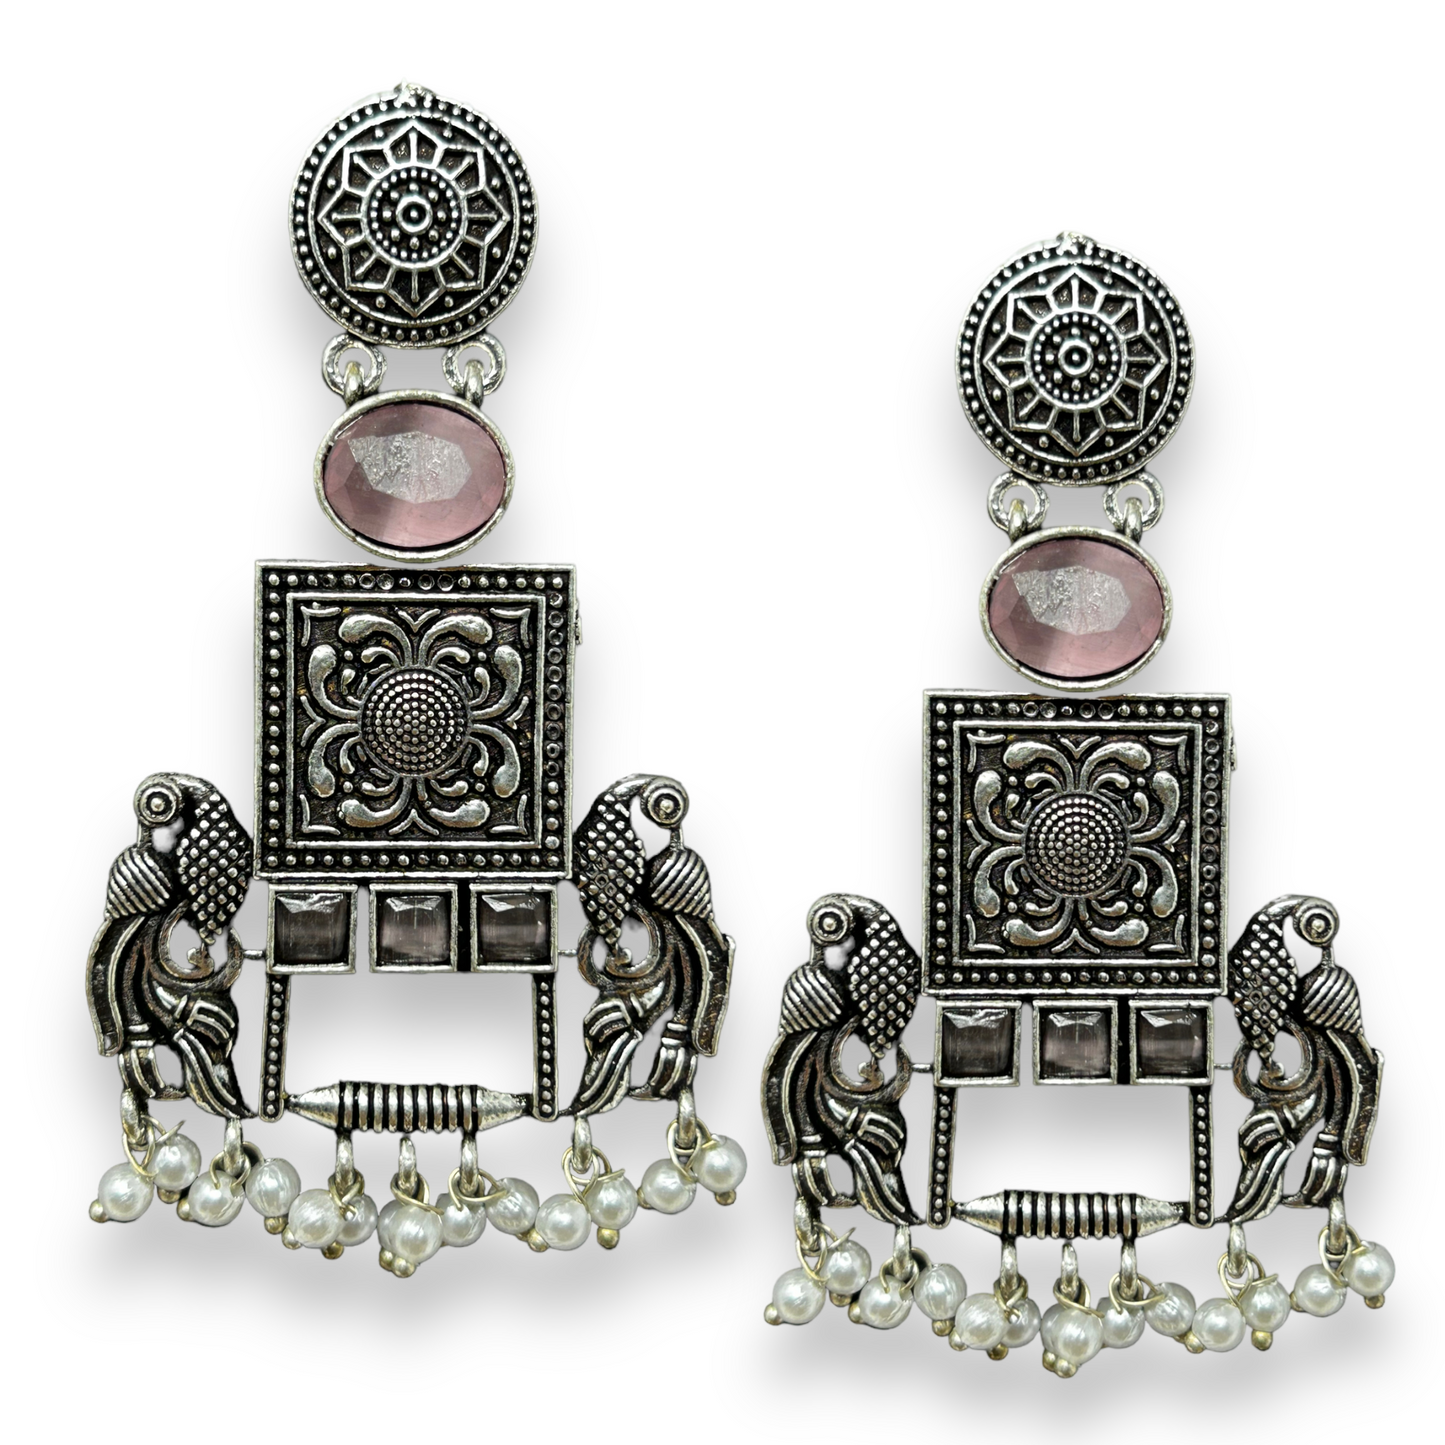 Exquisite German Silver Dangler Earrings for Stylish Statements